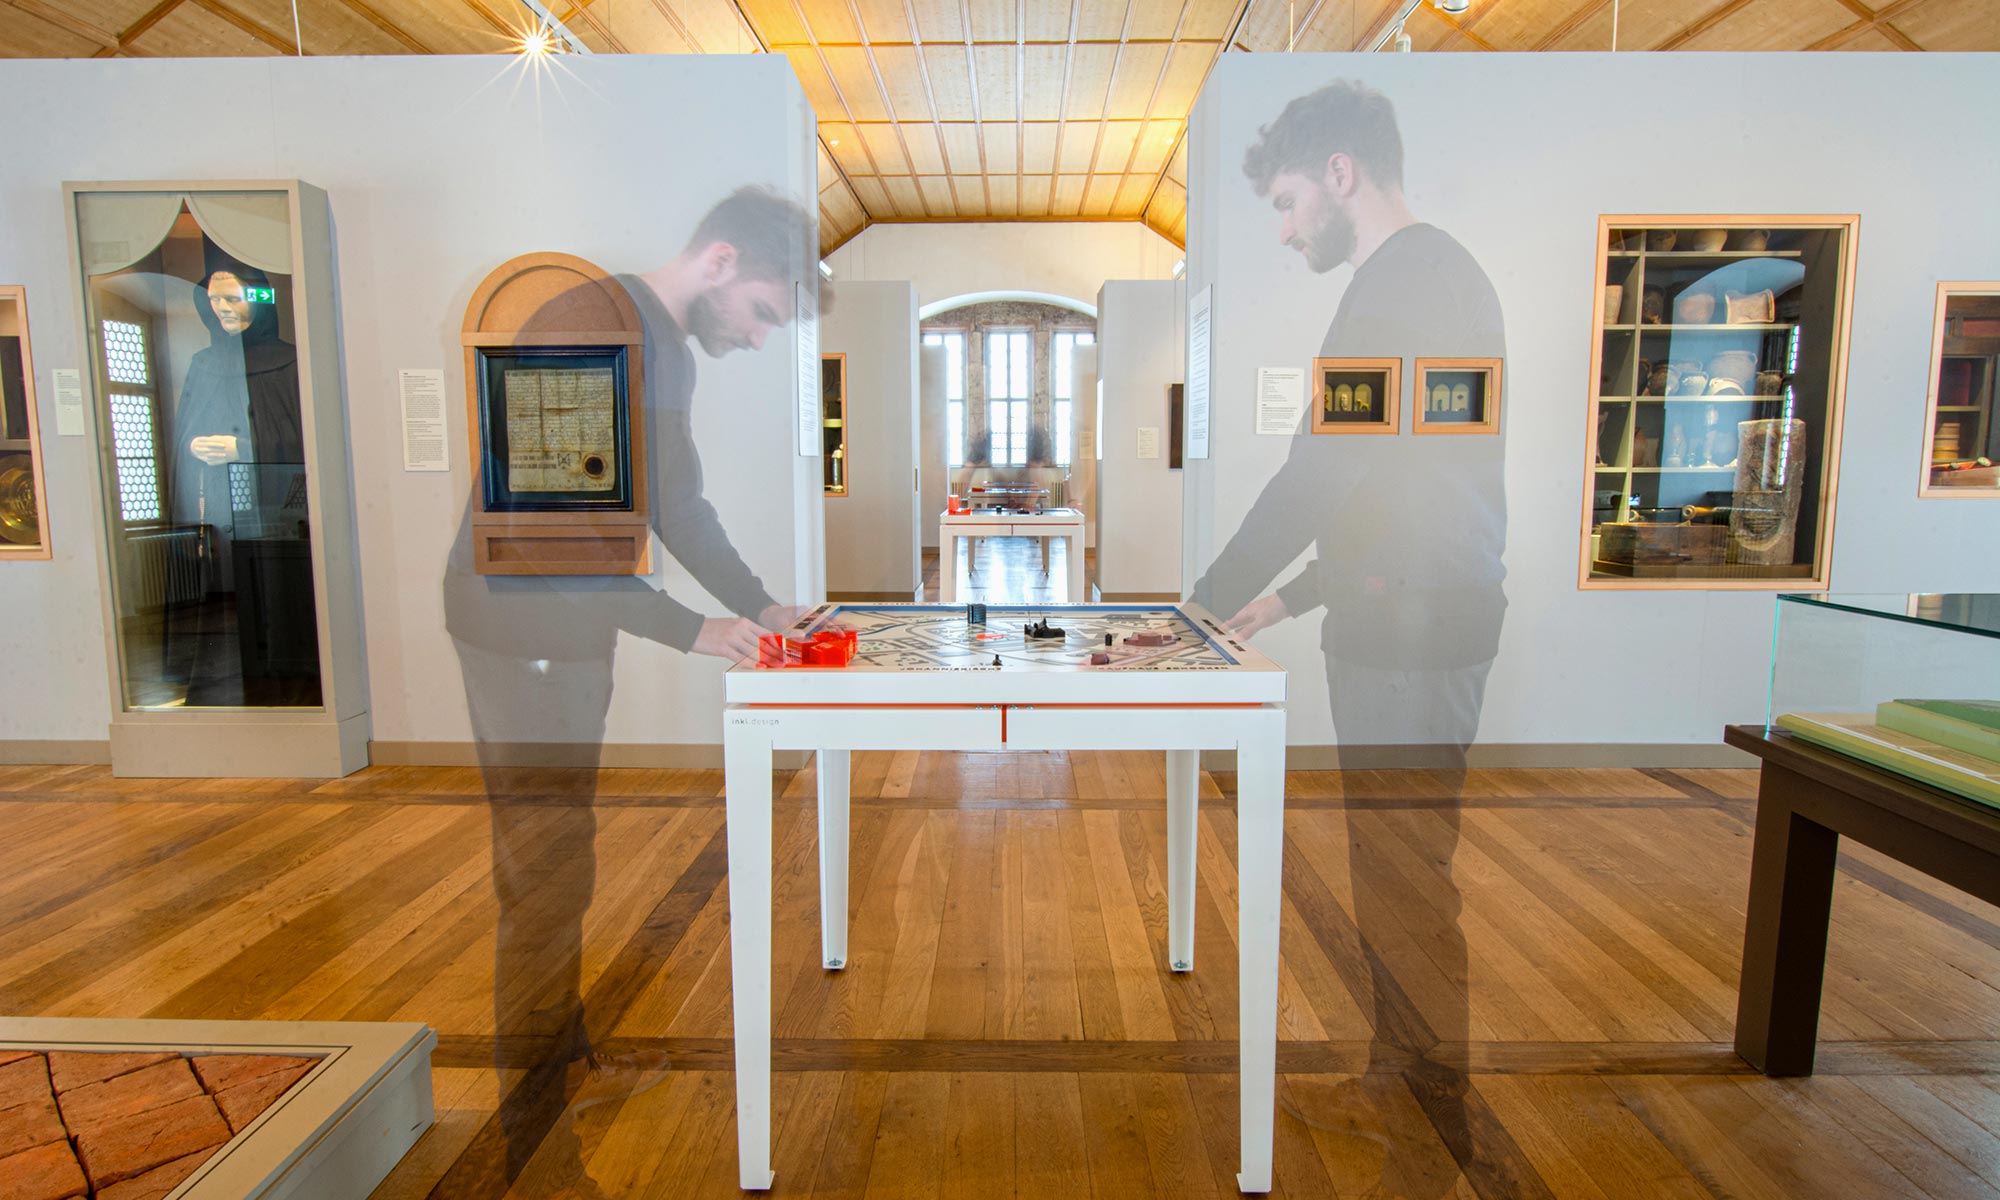 The photo shows an exhibition room of the Schlossbergmuseum Chemnitz. The floor and ceiling are made of wood, white walls divide the large room into different areas. In the foreground, one of the four tactile models stands on a white metal table. A visitor can be seen shadowily to the left and right of the table. He is touching the tactile model of the city.